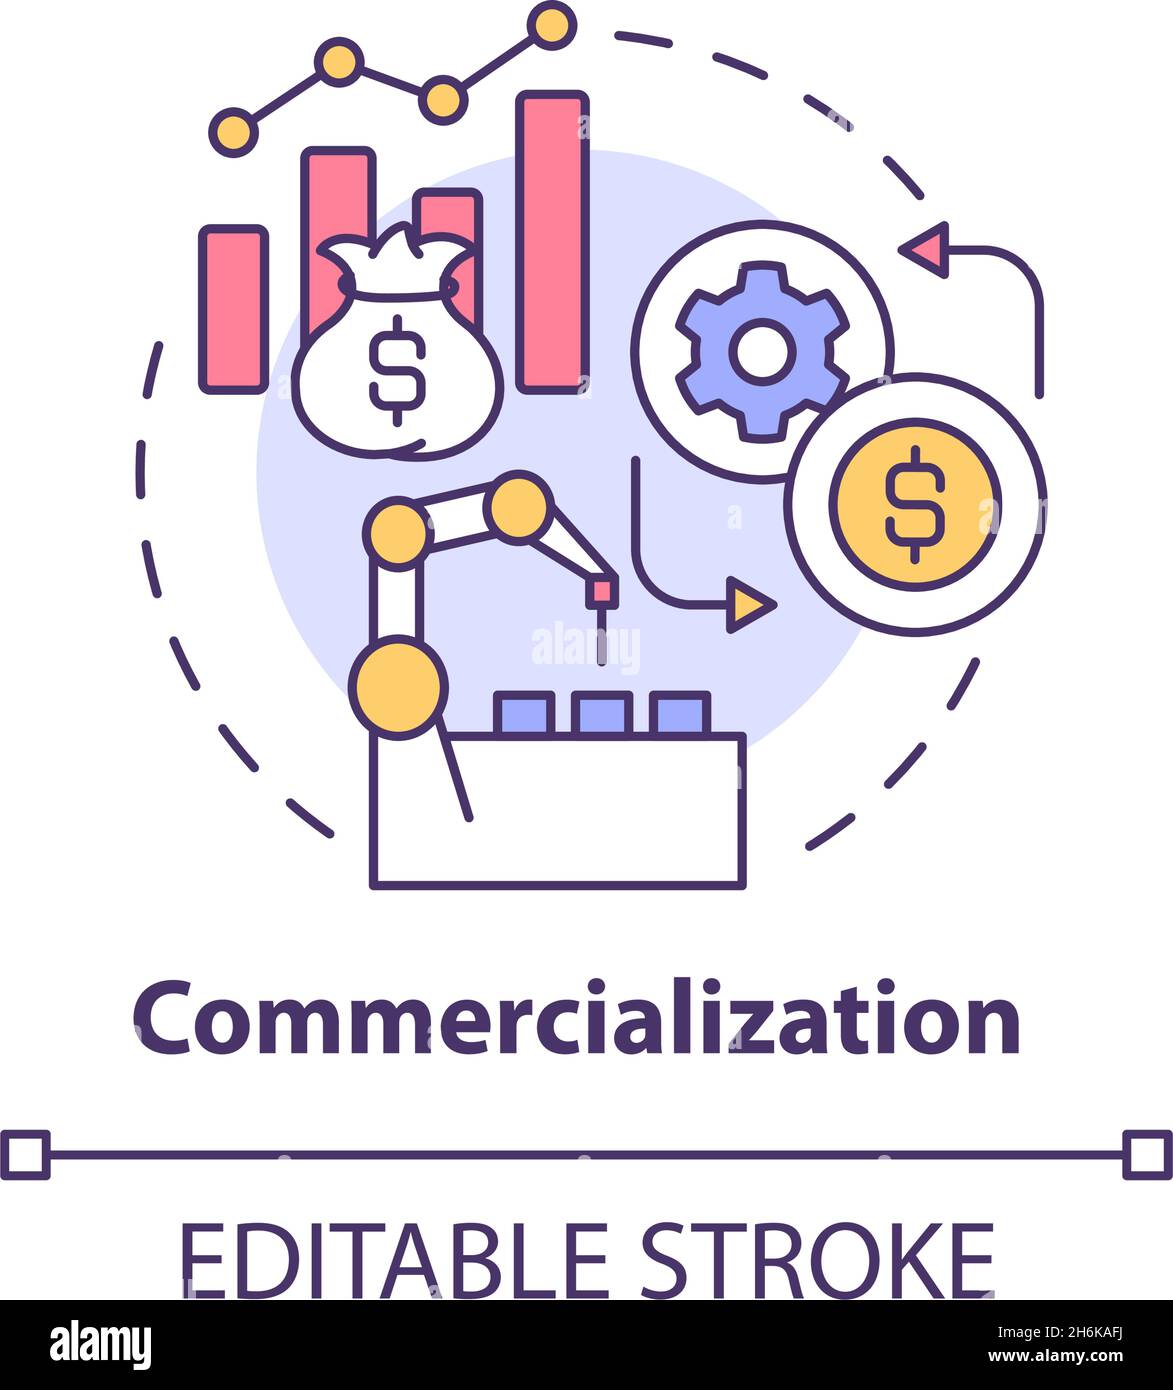 Commercialization concept icon Stock Vector